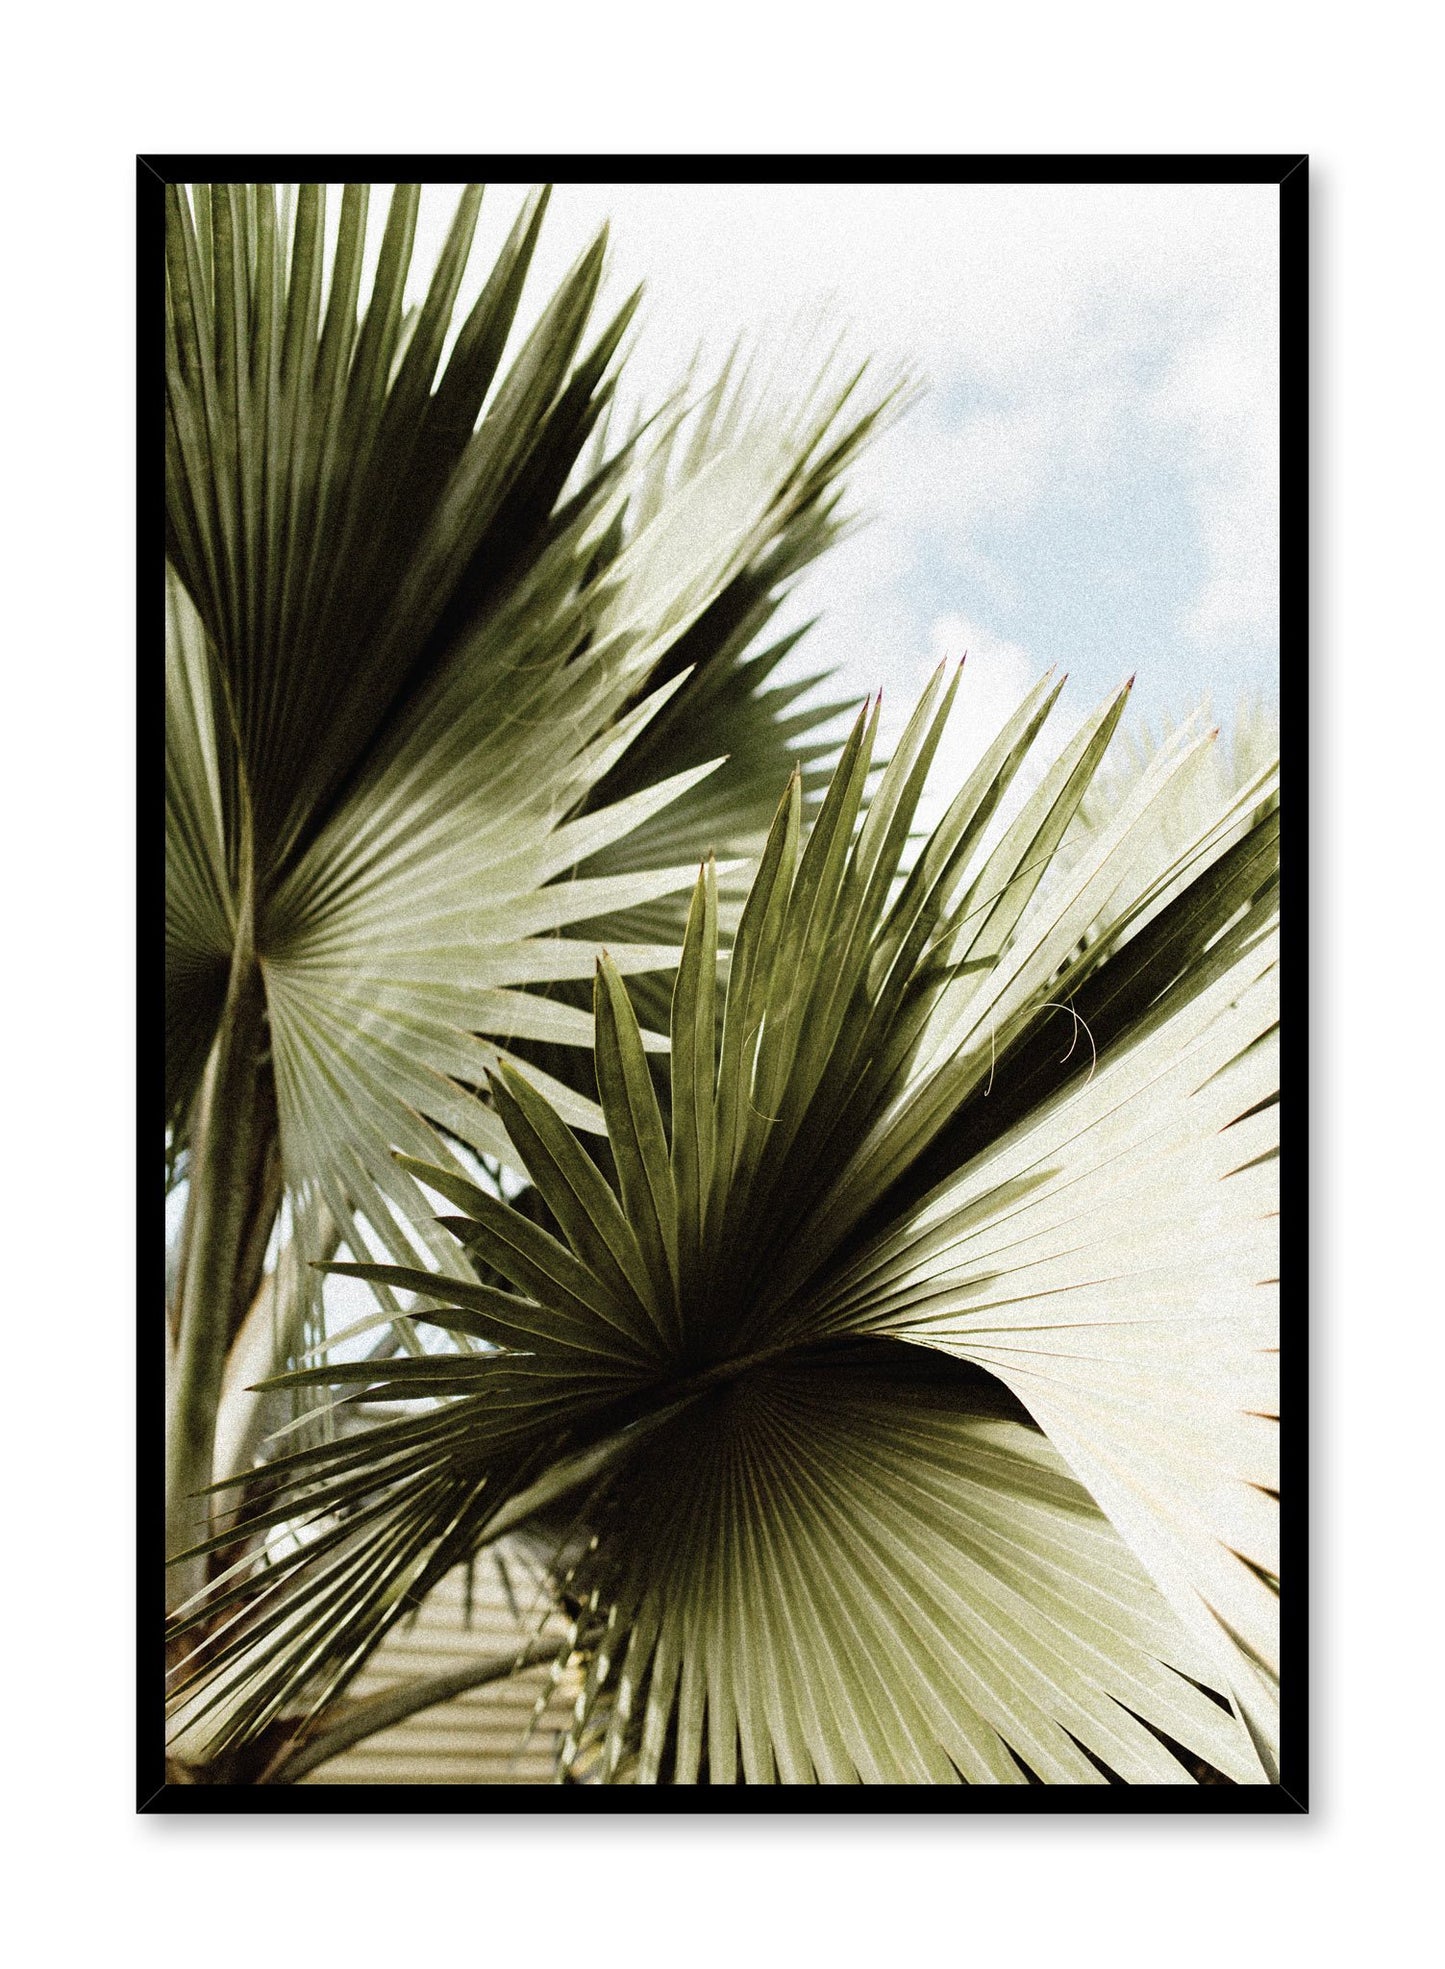 Modern minimalist botanical photography poster by Opposite Wall with palm leaves.